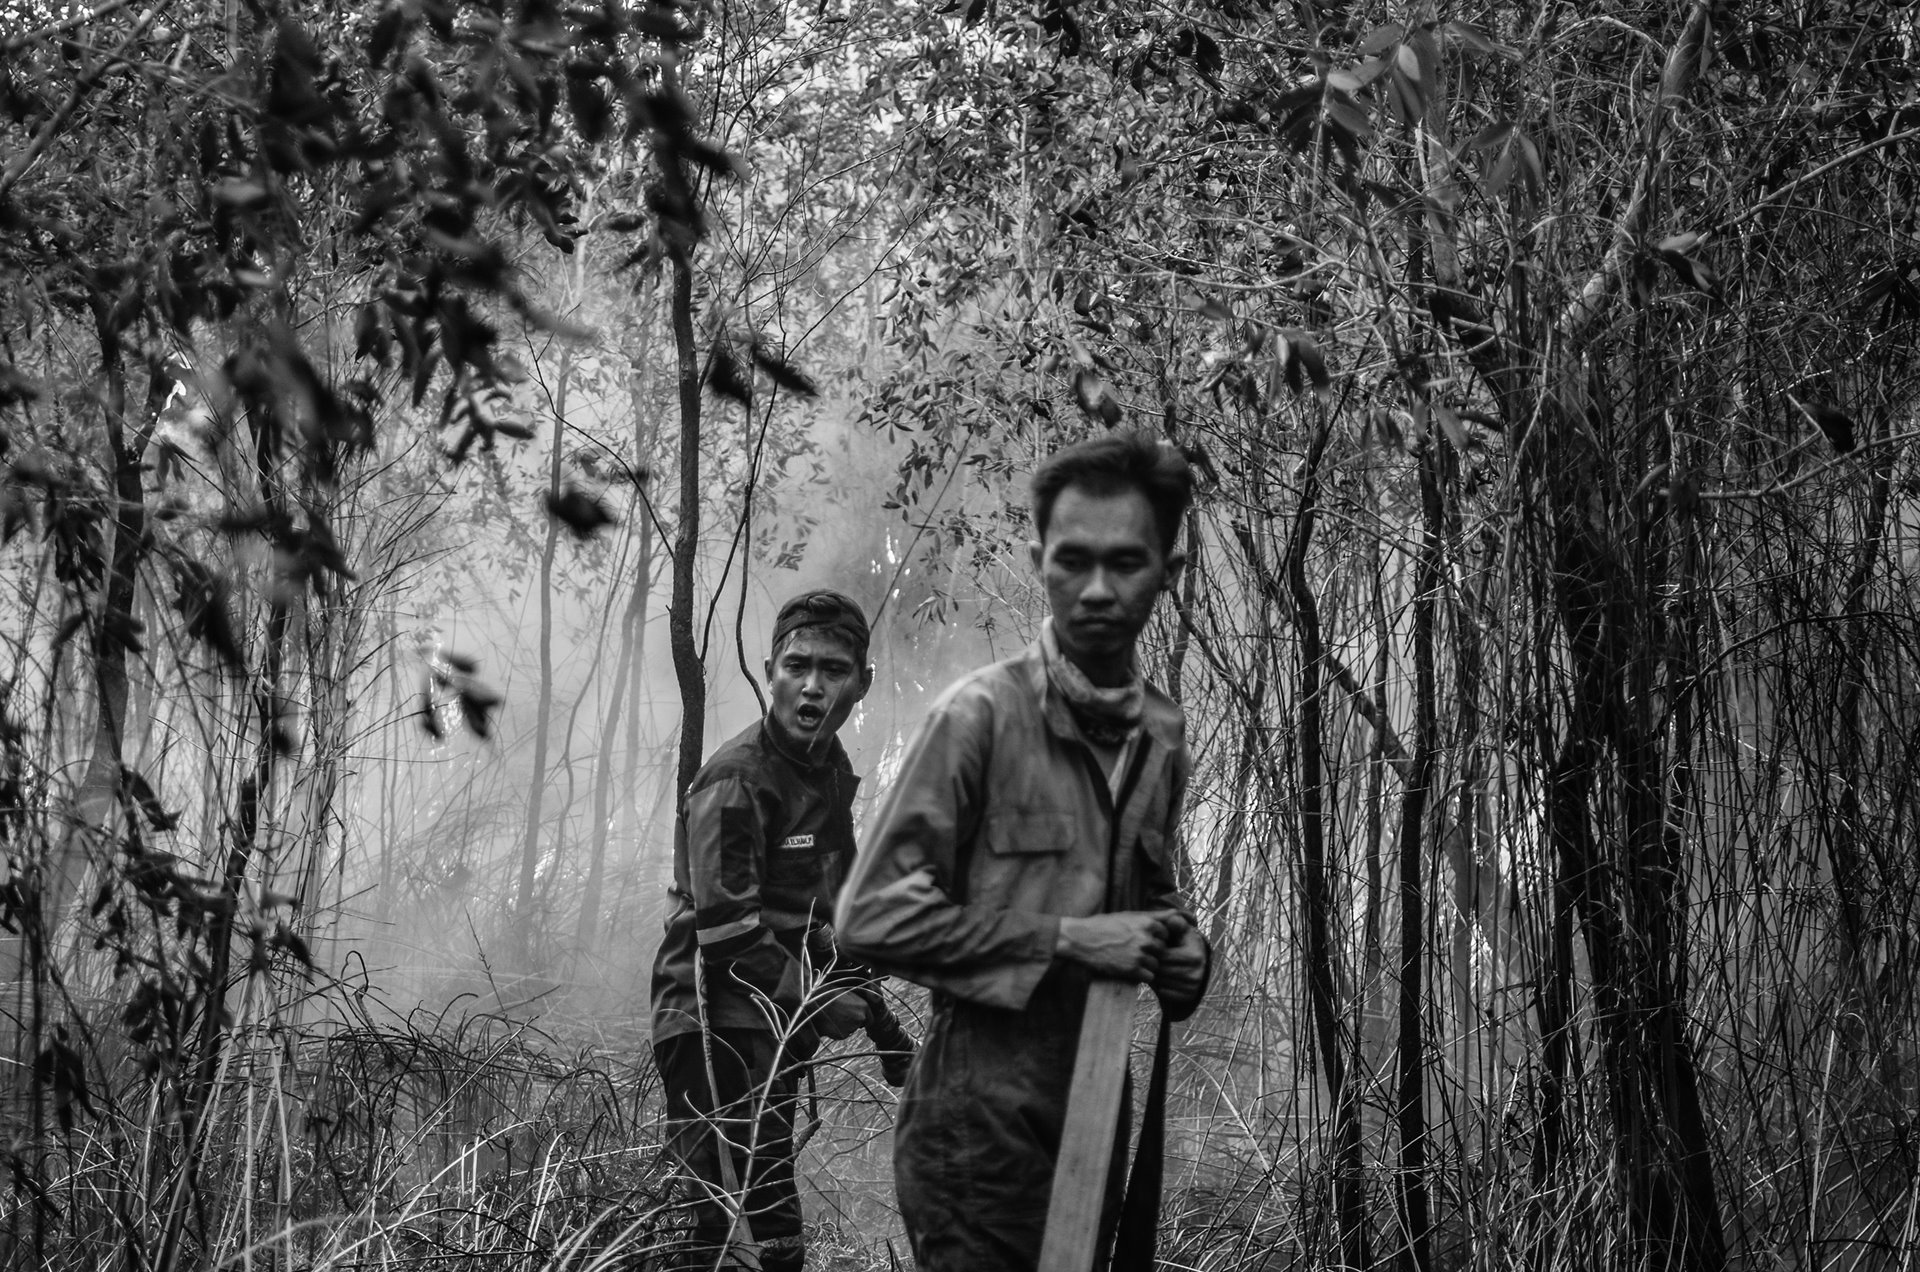 A firefighter shouts to a colleague for water to extinguish a peat fire in Arisan Jaya, South Sumatra, Indonesia. Burning peatlands are difficult to extinguish, and, in the dry season, water was difficult to obtain.